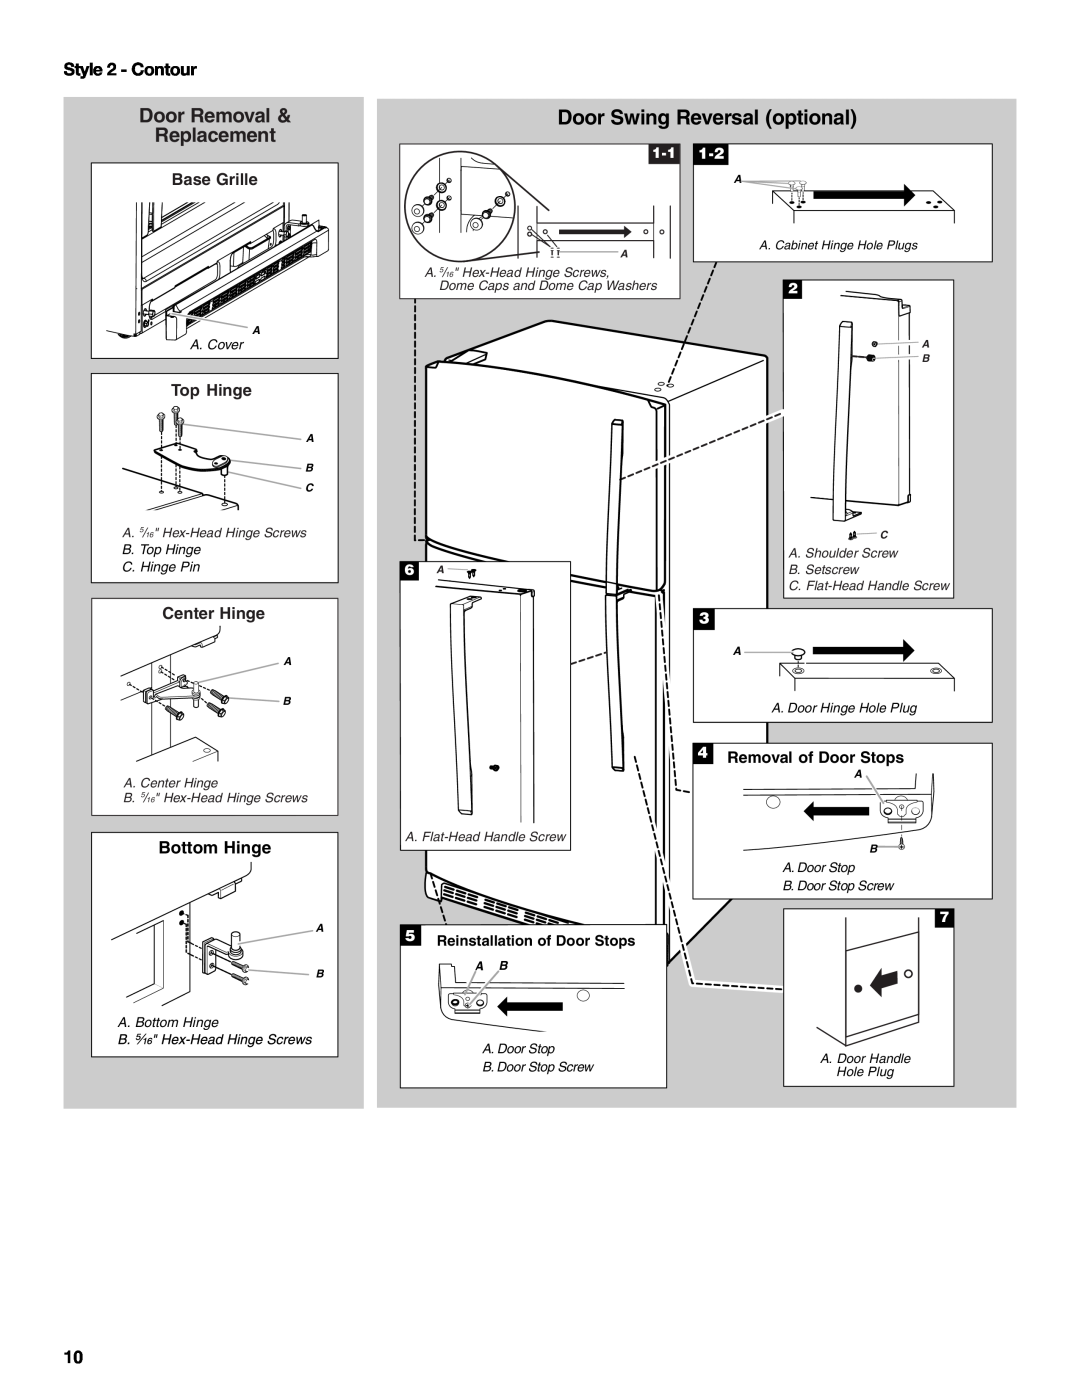 Whirlpool W10726840A Door Swing Reversal optional, Style 2 - Contour, Door Removal & Replacement, Bottom Hinge, A. Cover 